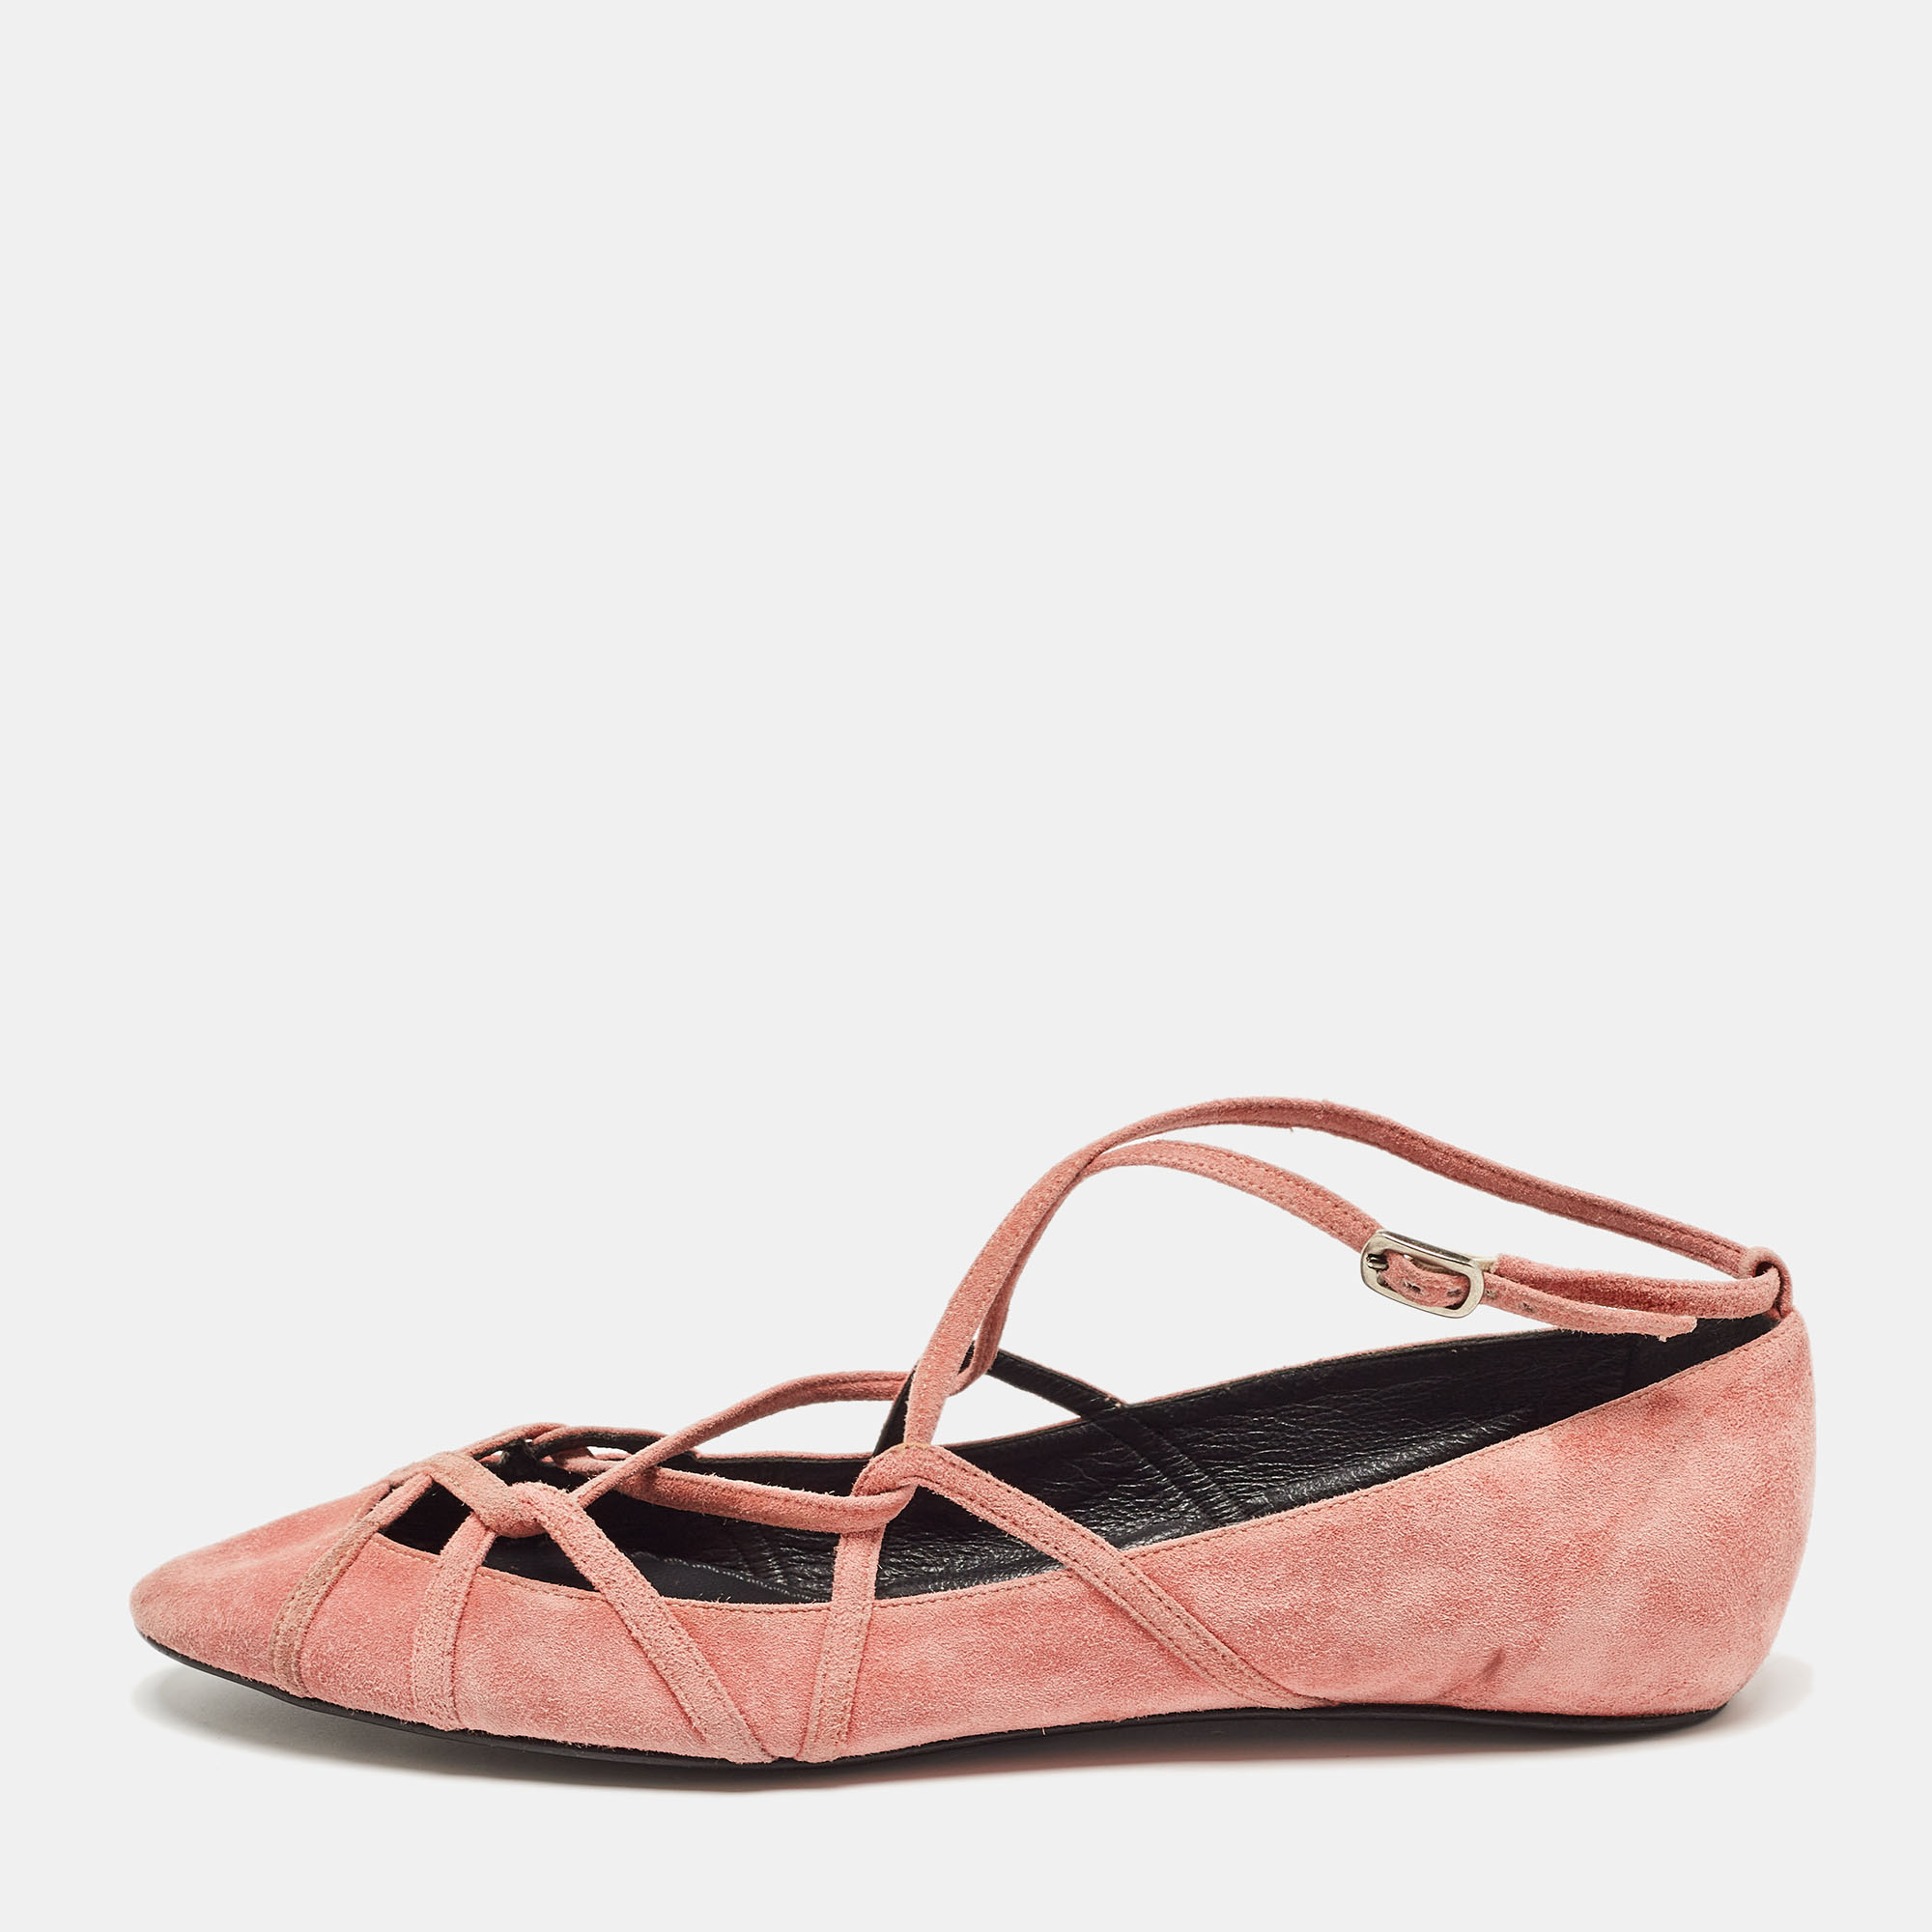 Marc jacobs pink suede strappy ballet flats size 37